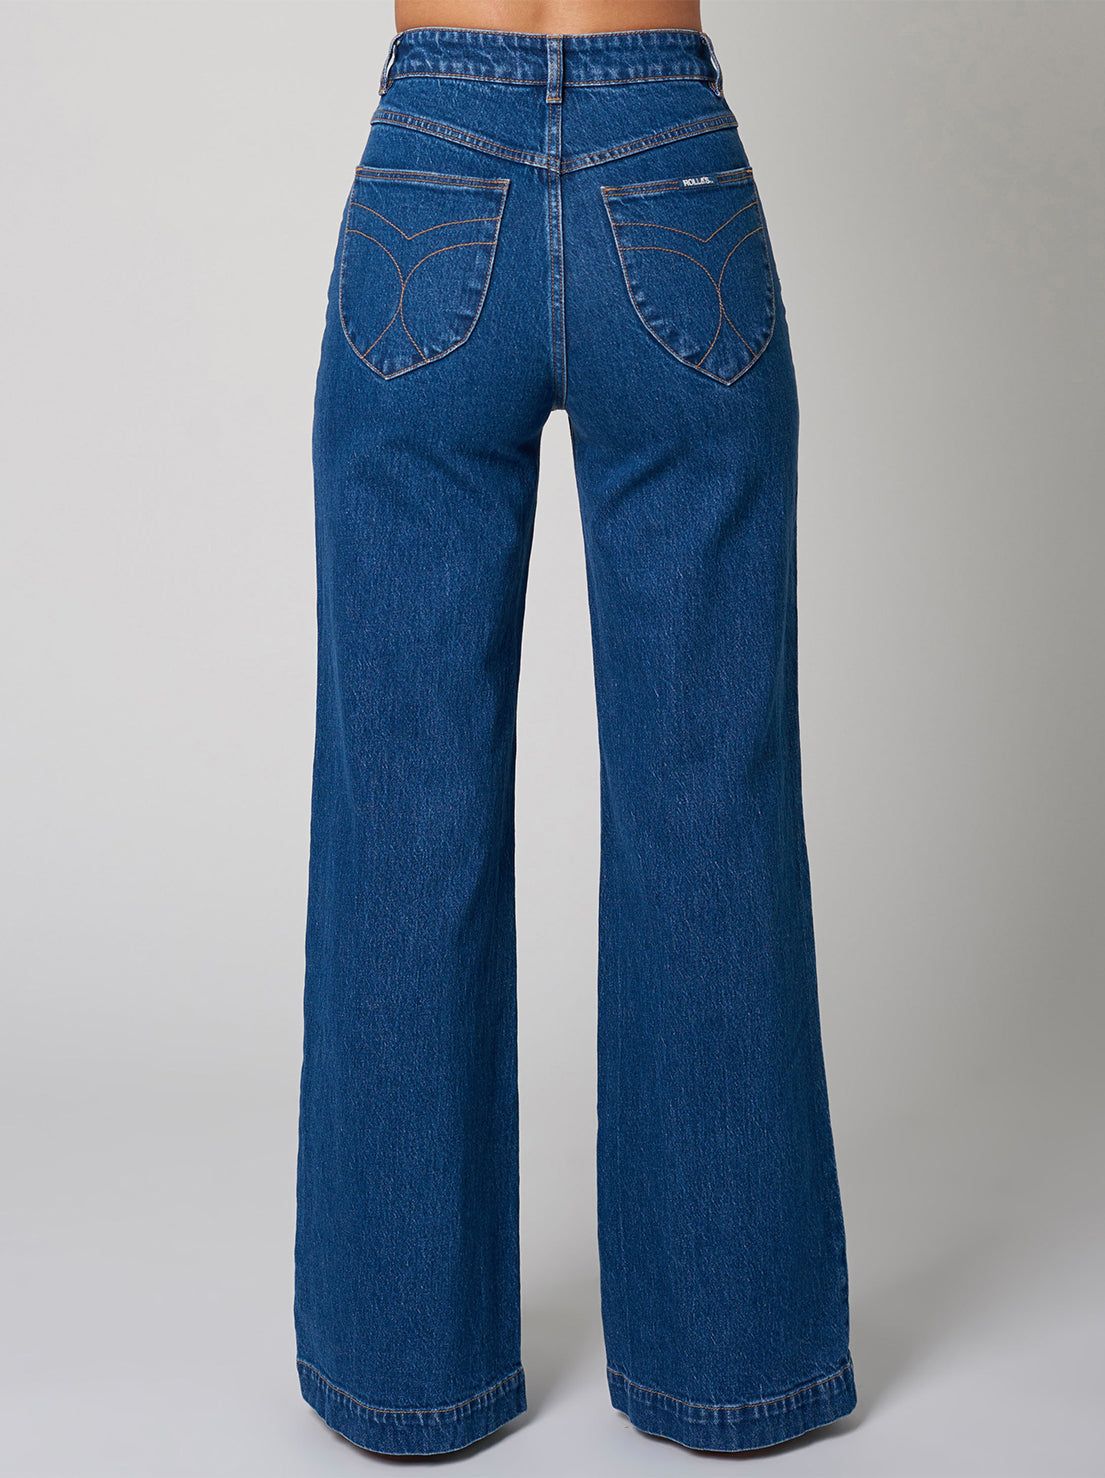 Rolla's - Sailor Jean Long - Eco Ruby Blue